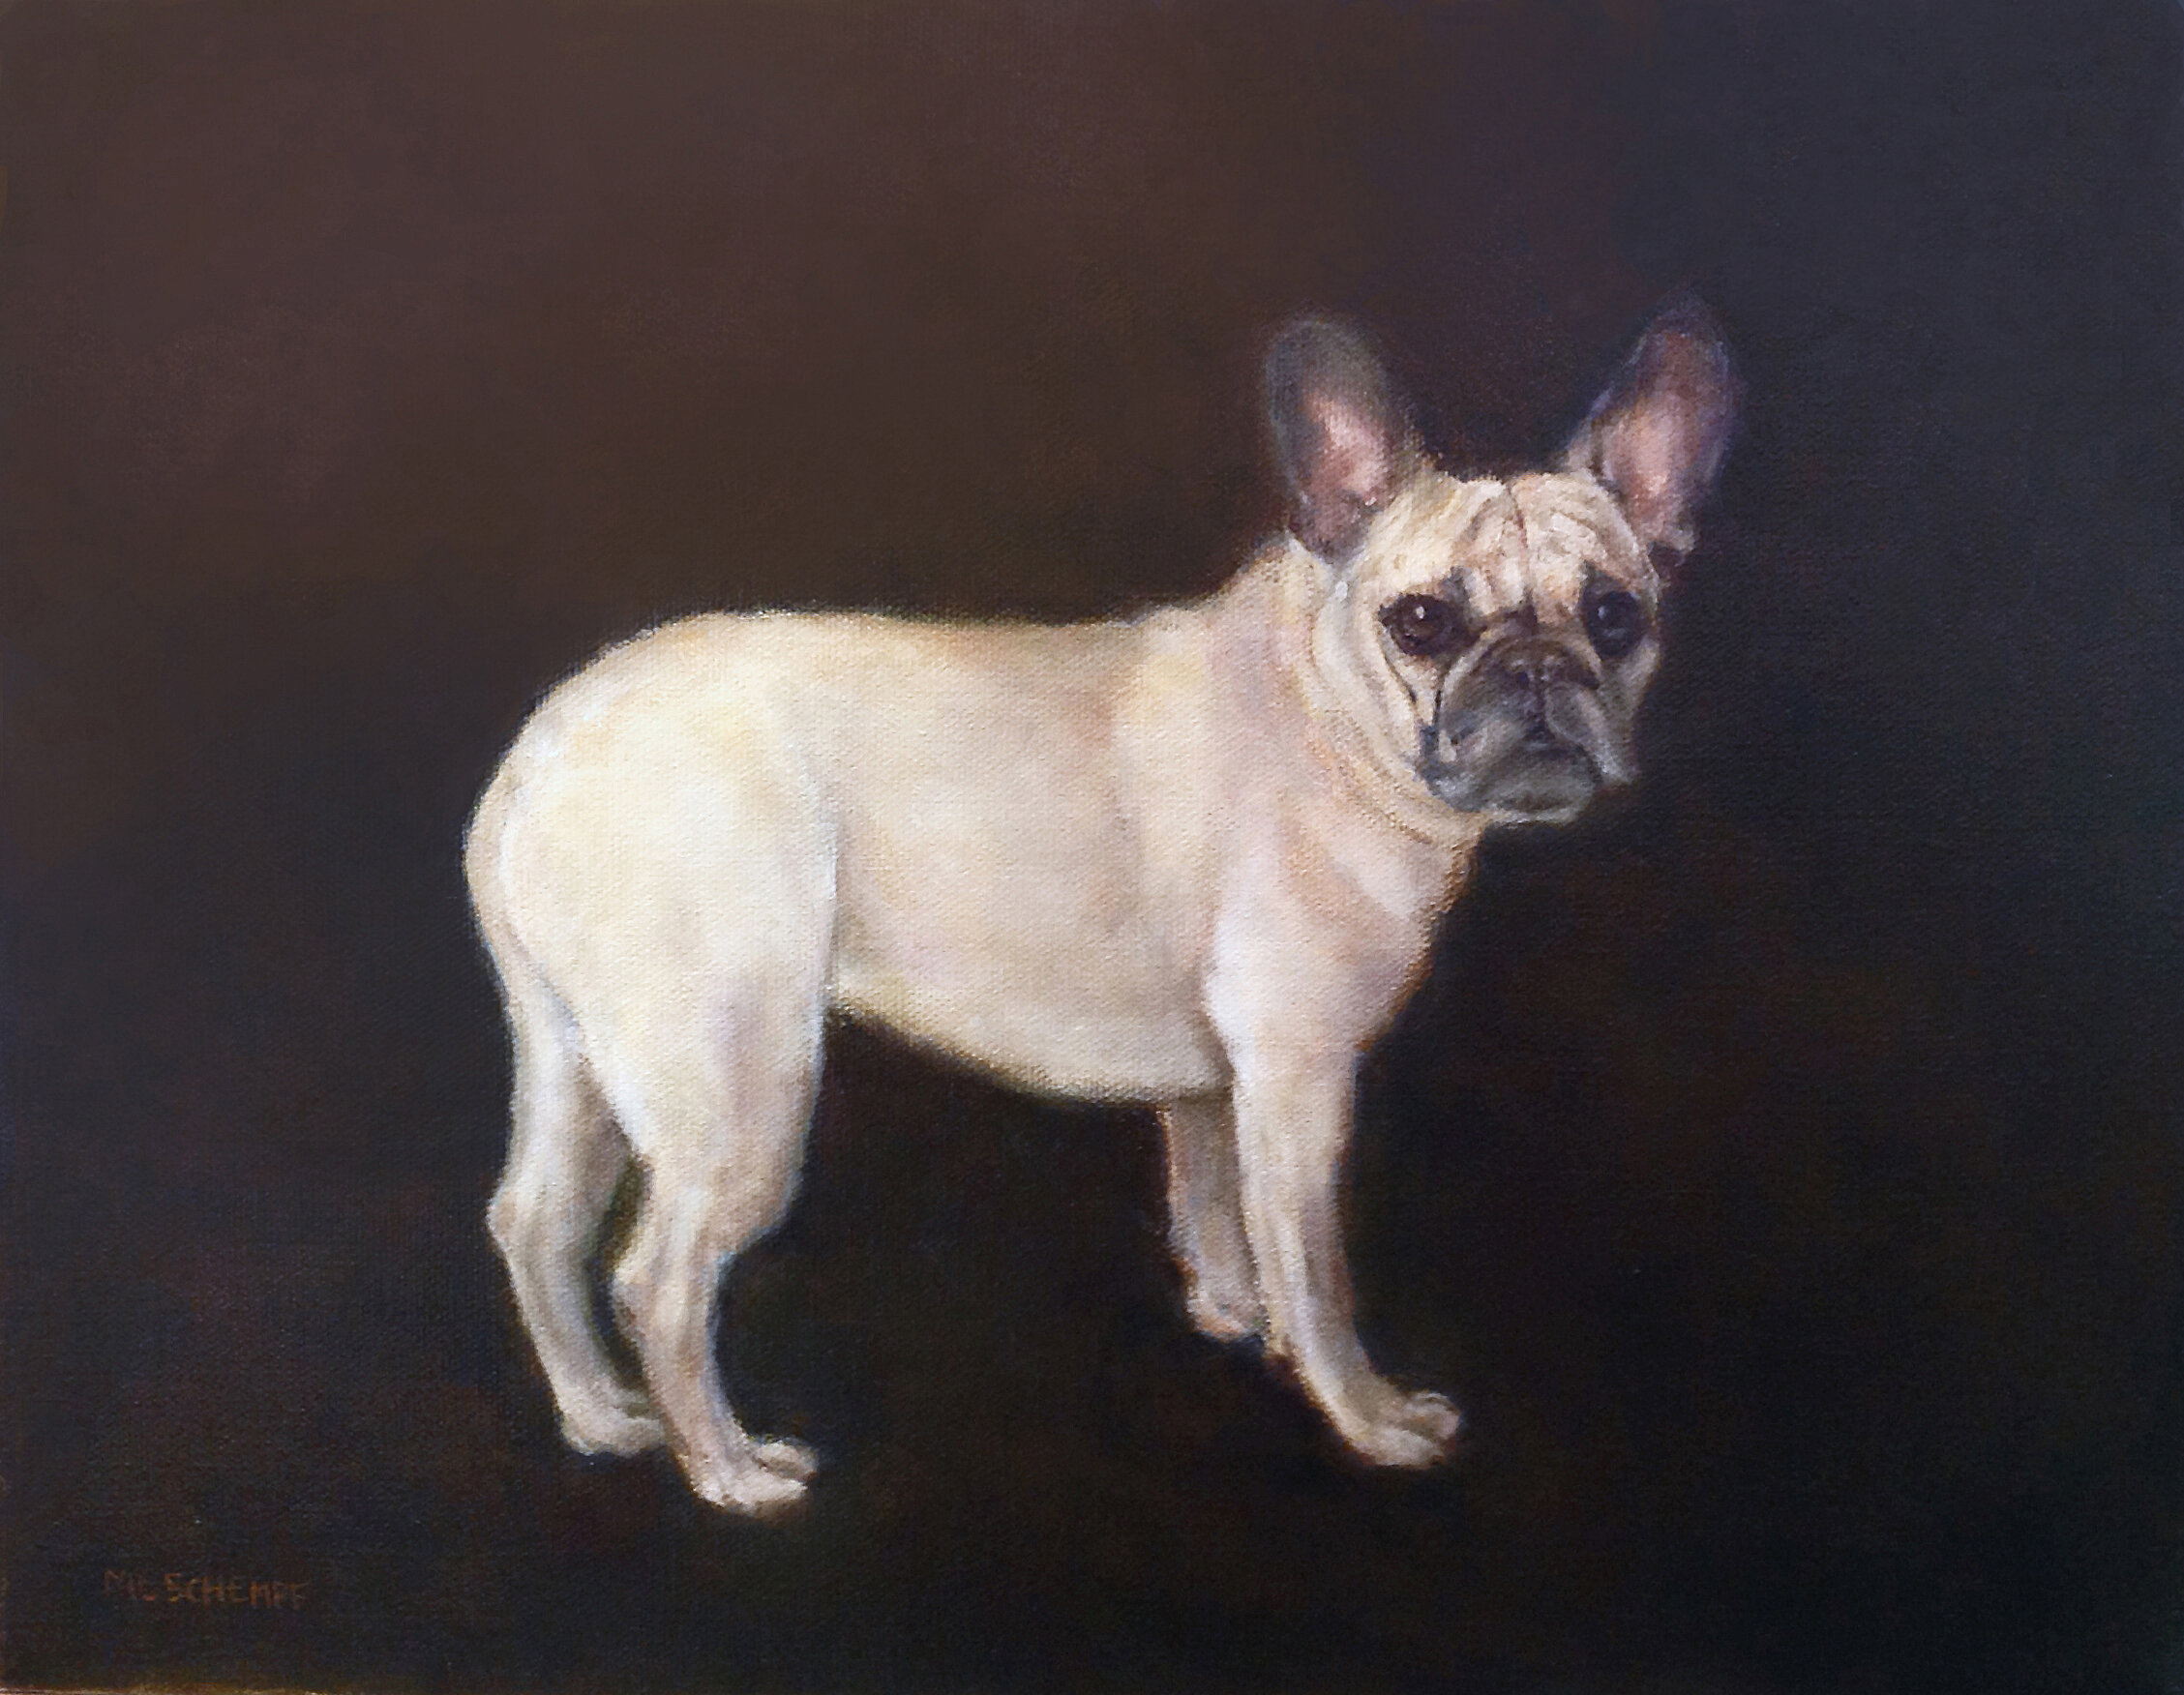  Mary Lou Schempf  Frenchie,  11” x 14”, oil on canvas   (private collection)  